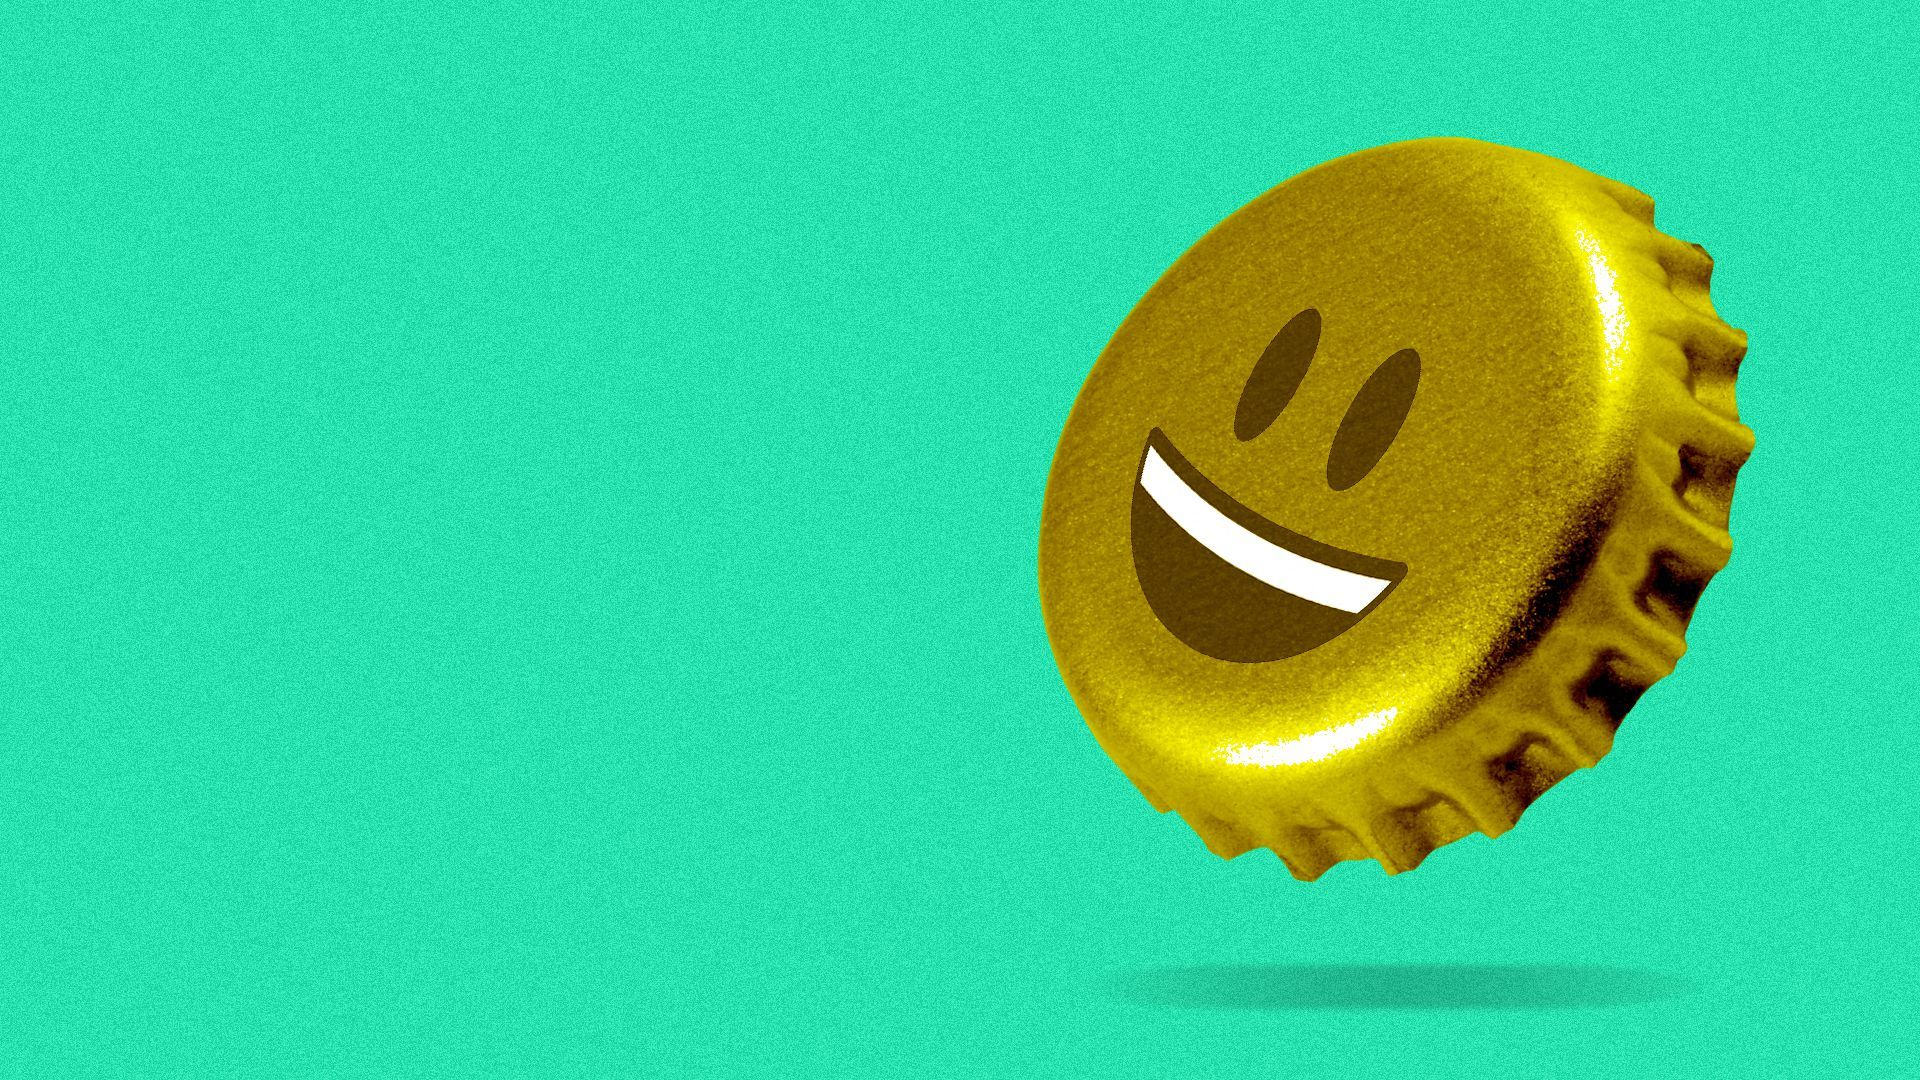 Illustration of a beer bottle cap with a grinning emoji face on it.